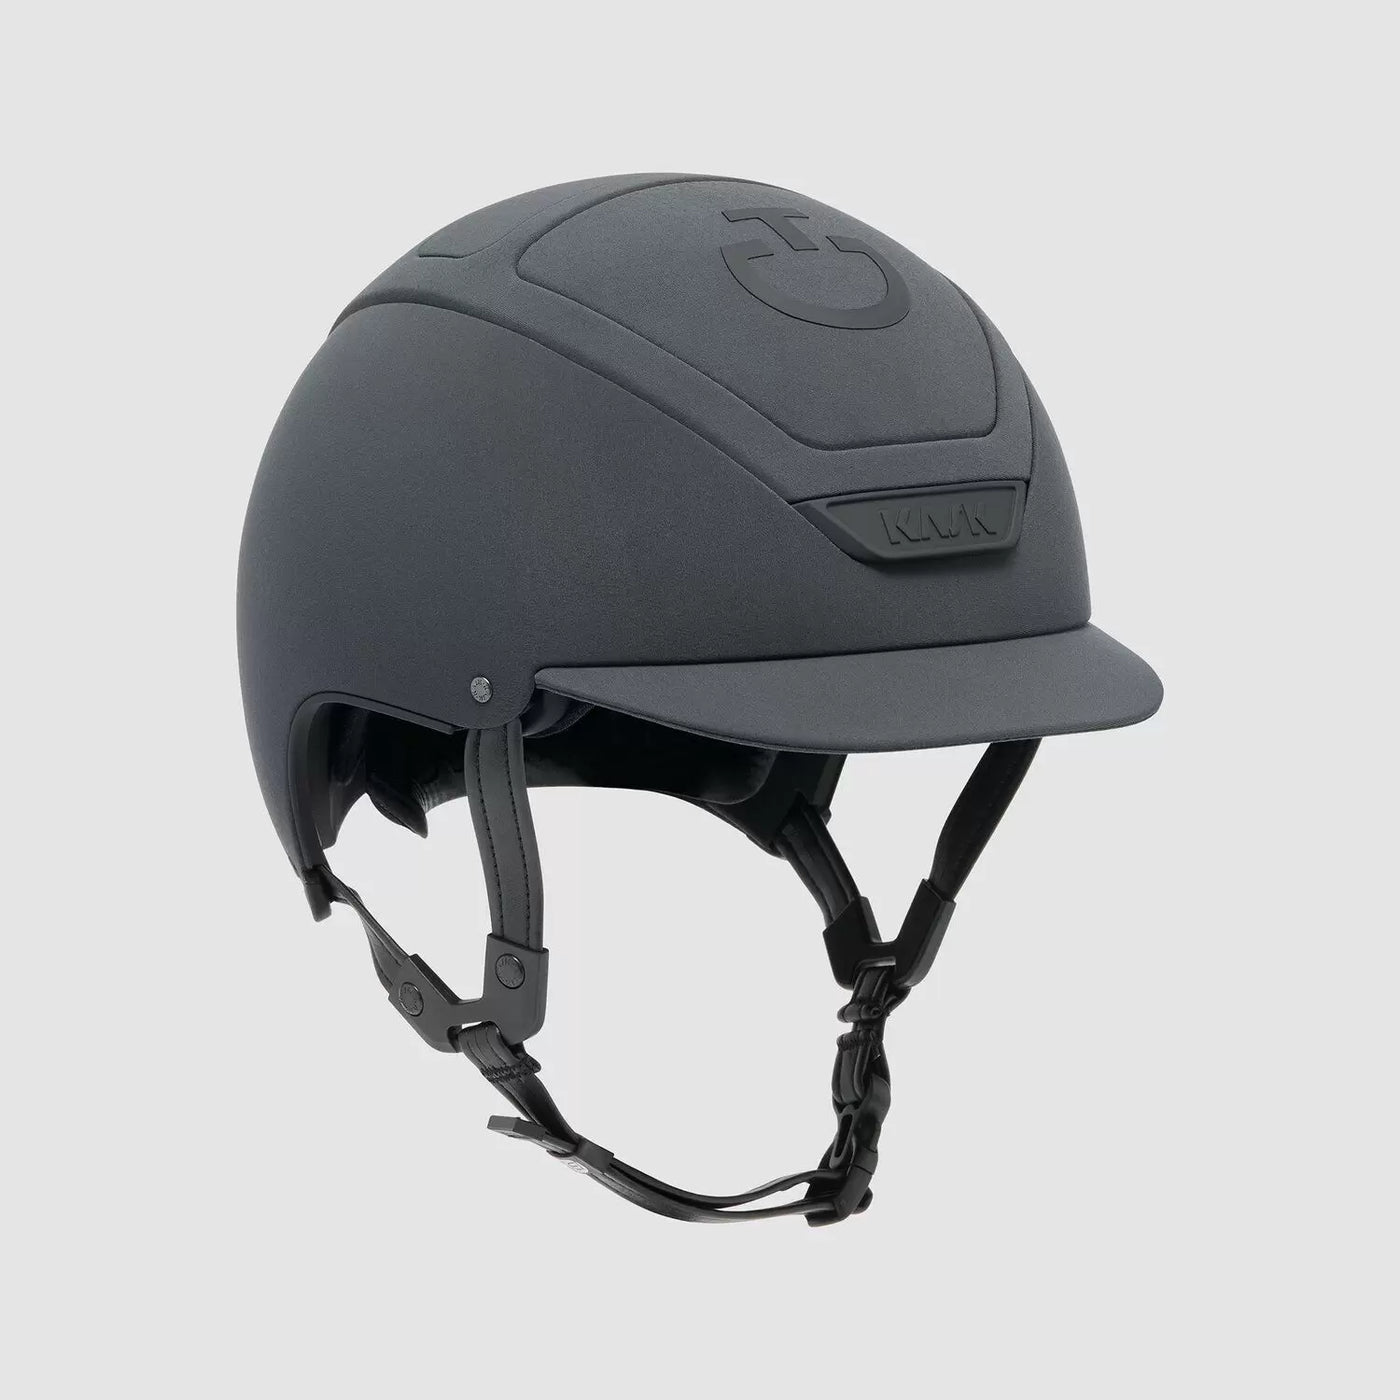 CT / KASK Reithelm